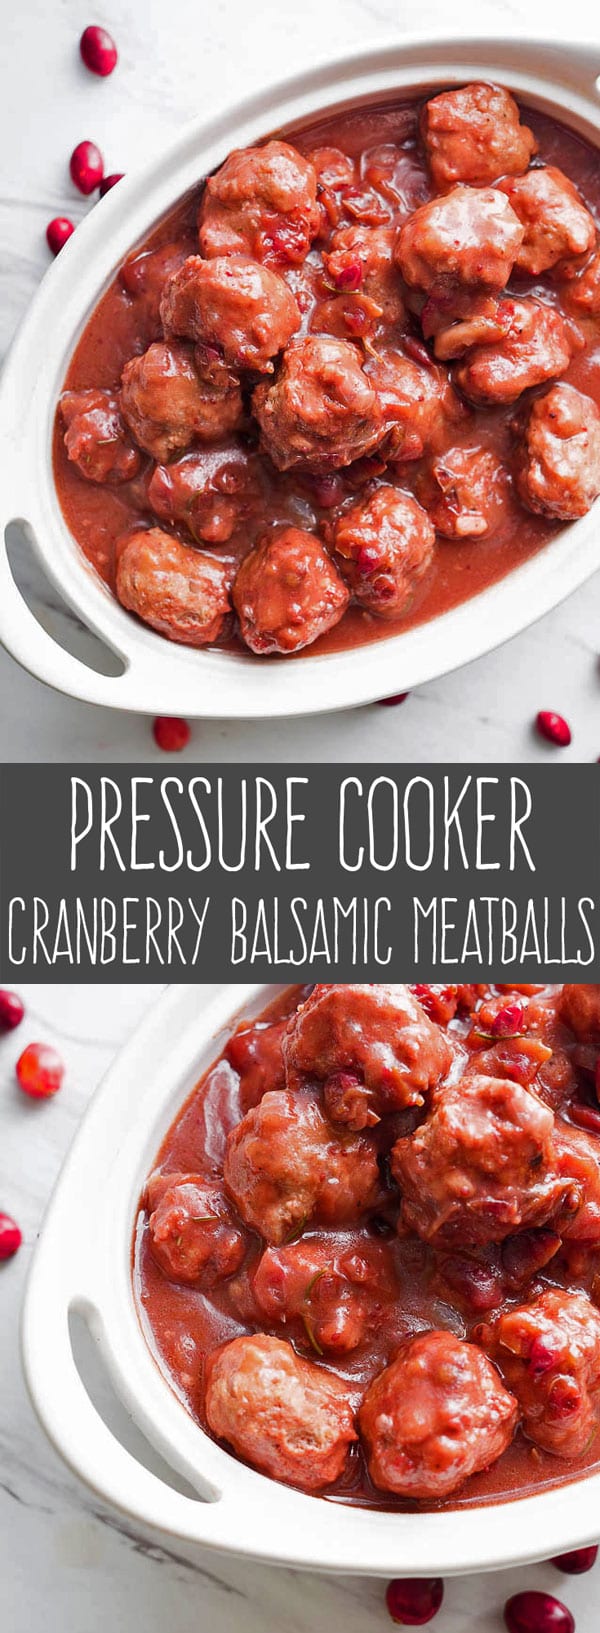 Cranberry Balsamic Meatballs are the perfect appetizer for holiday entertaining. Pop one into your mouth and taste an explosion of cranberry, rosemary, and balsamic vinegar packed into one savory bite. Making balsamic meatballs in an Instapot is quick and easy with this pressure cooker meatballs recipe. #pressurecooker #instantpot #appetizer via @PressureCook2da